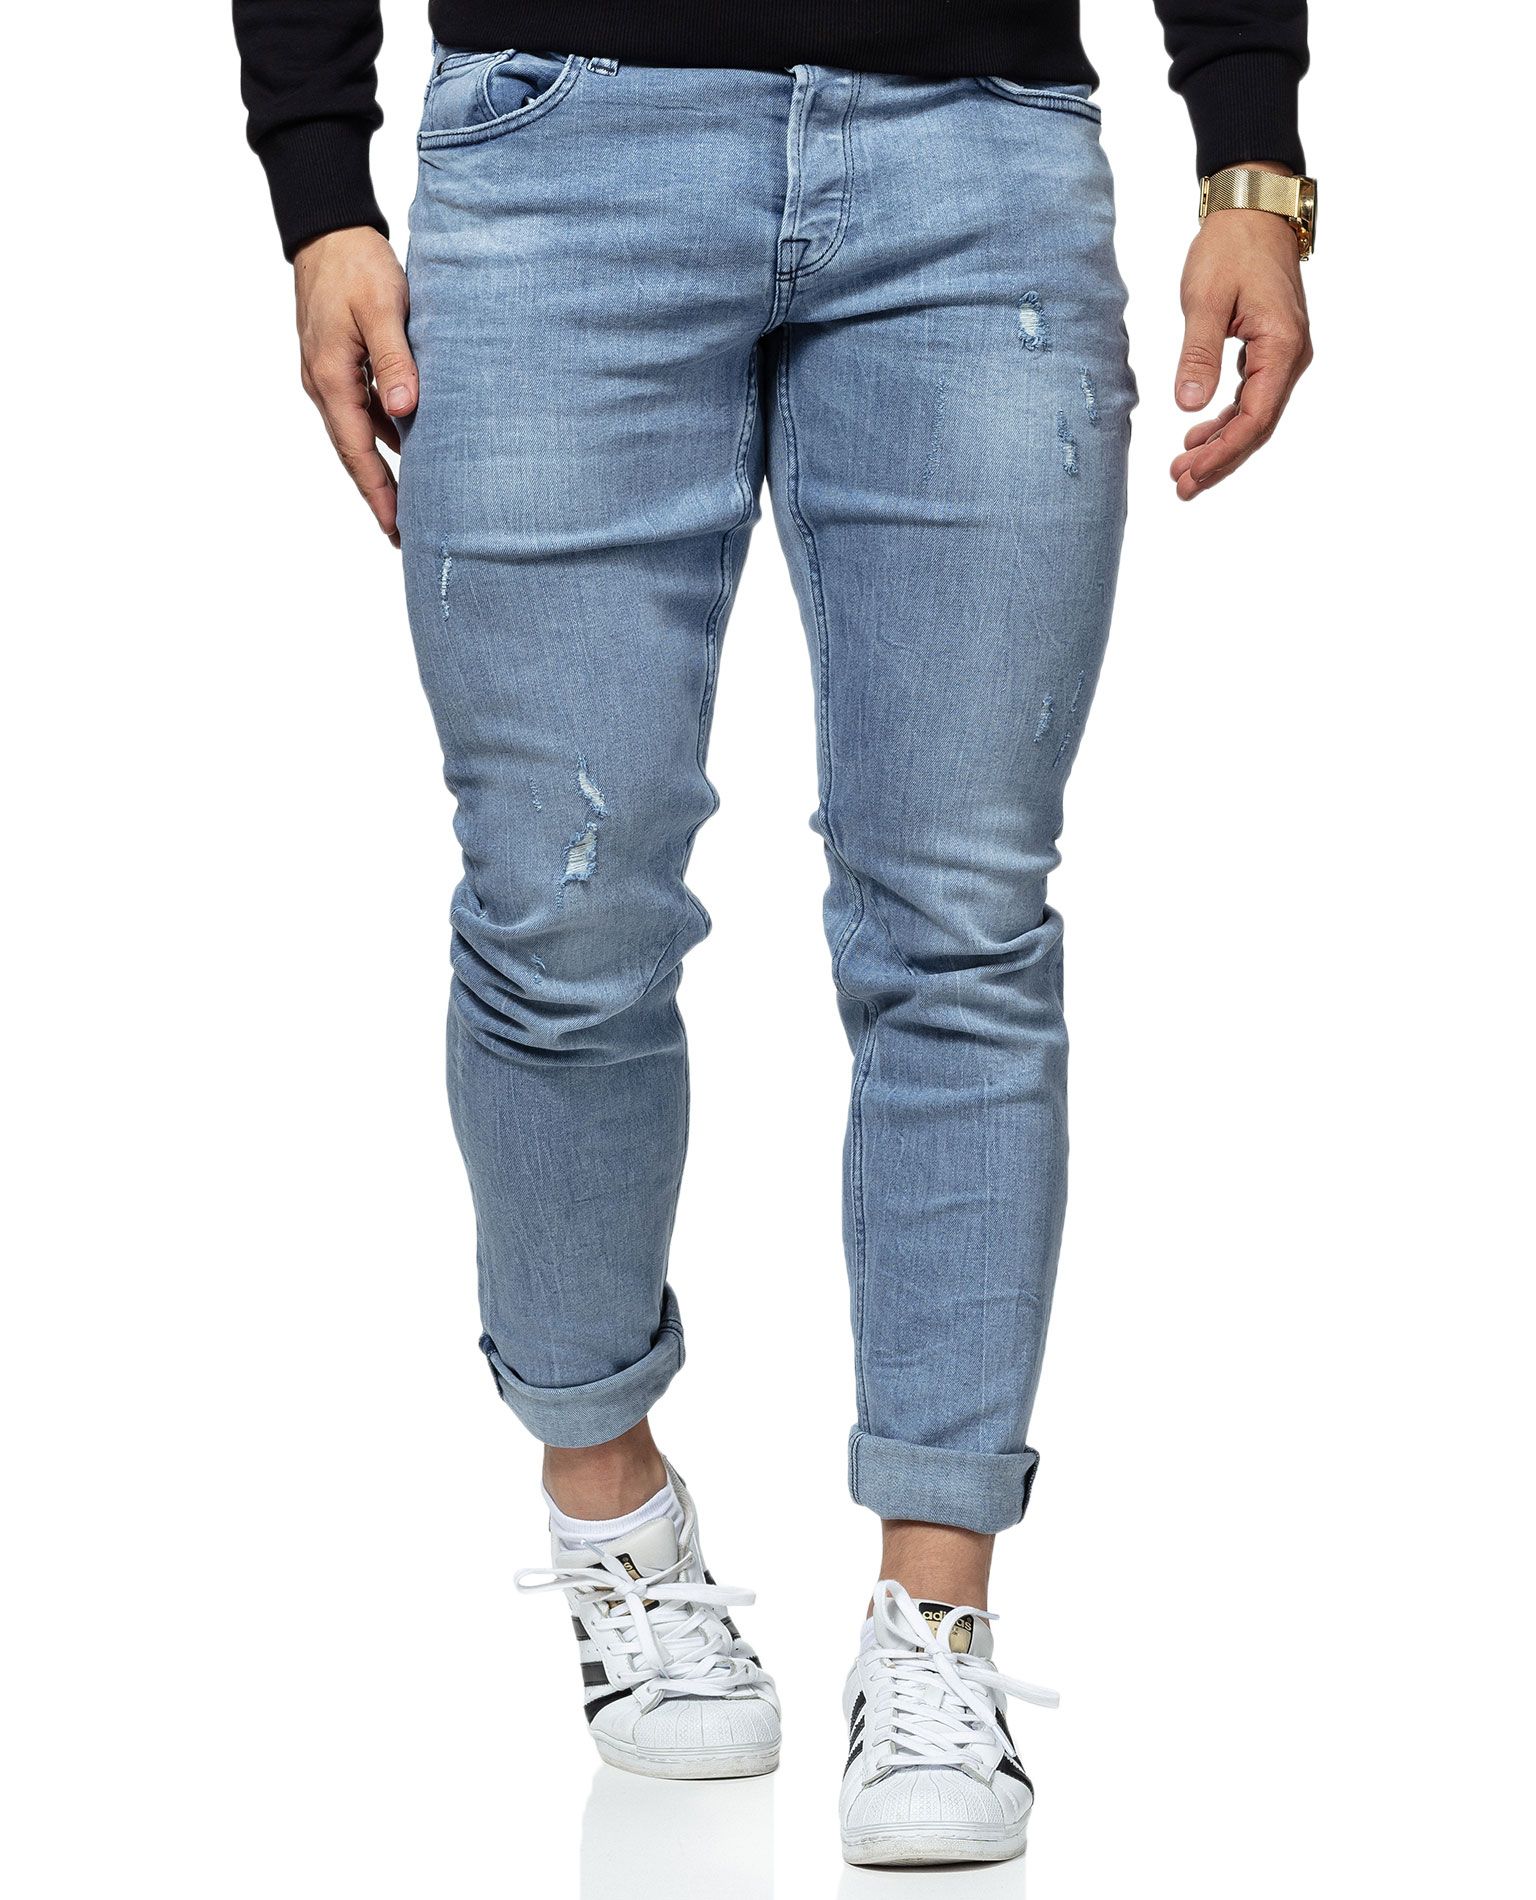 Loom Slim Blue L32 Only & Sons - 5261 - Jeans - Jerone